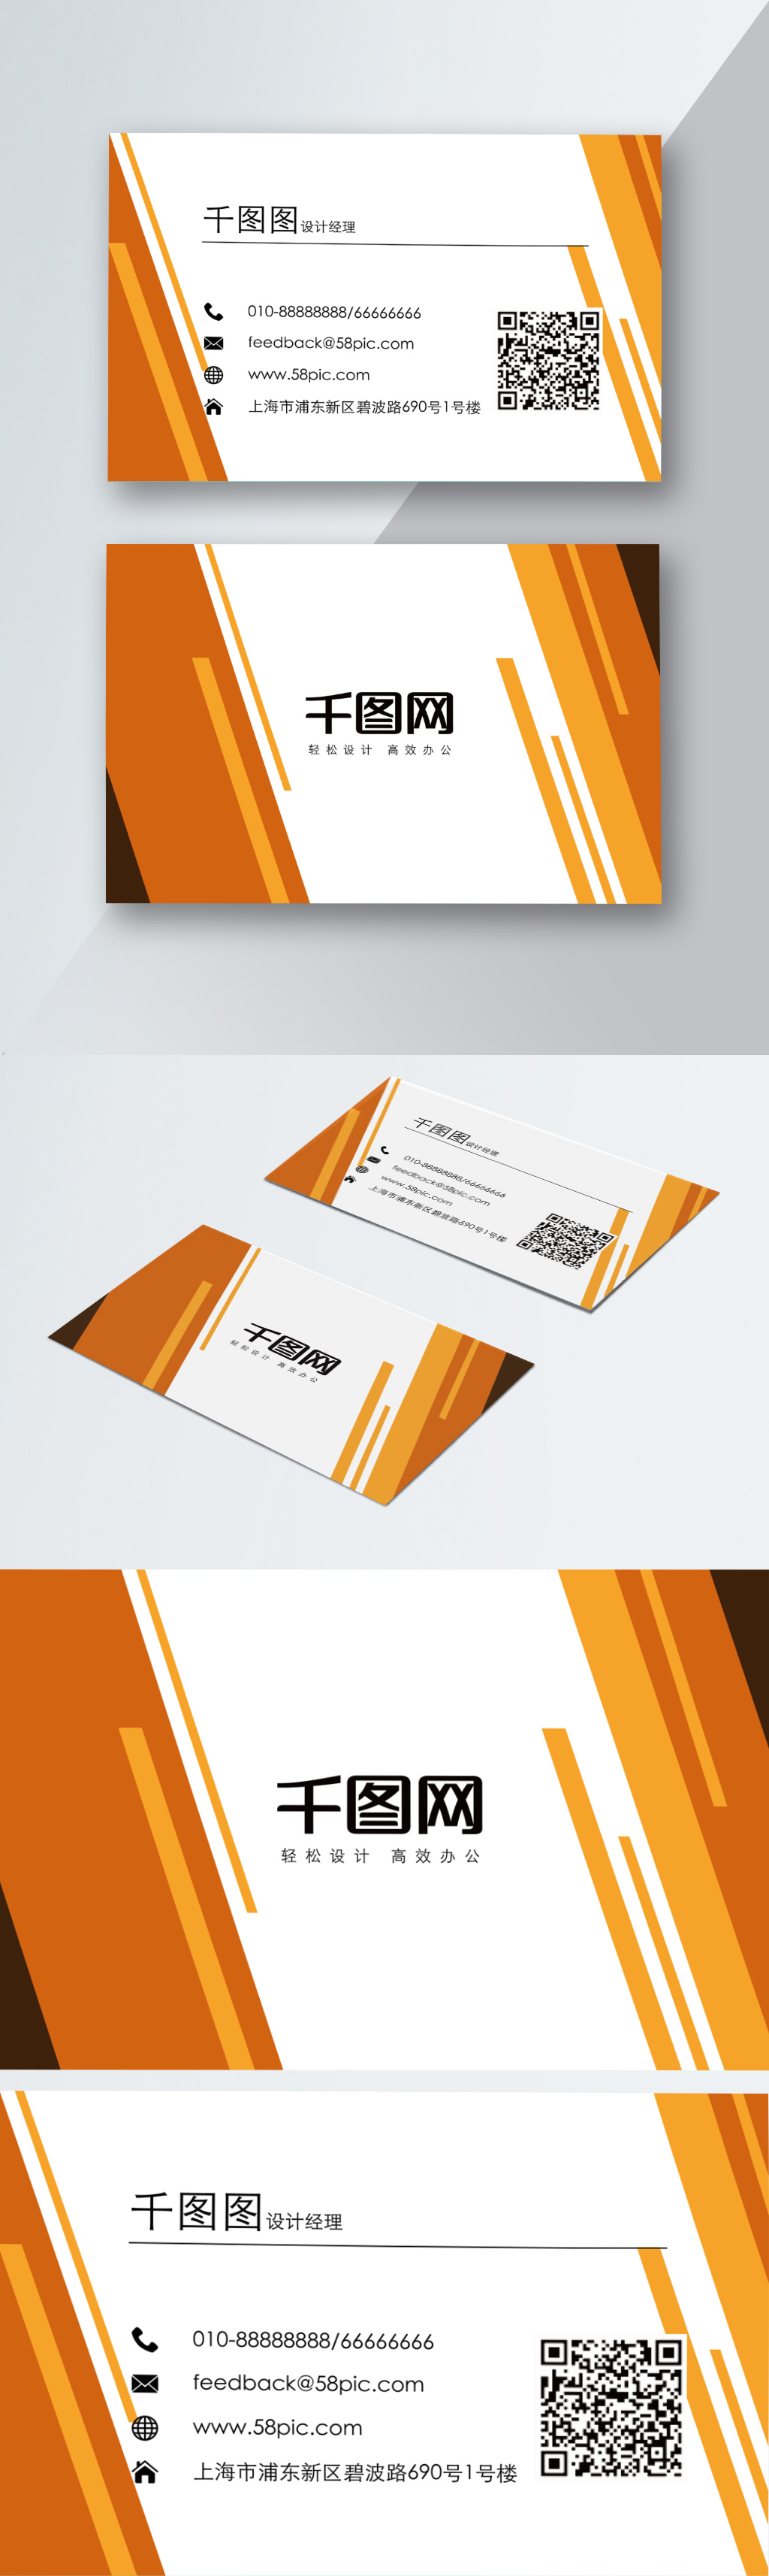 Yellow Business Card Template Image Picture Free Download 400900337 Lovepik Com